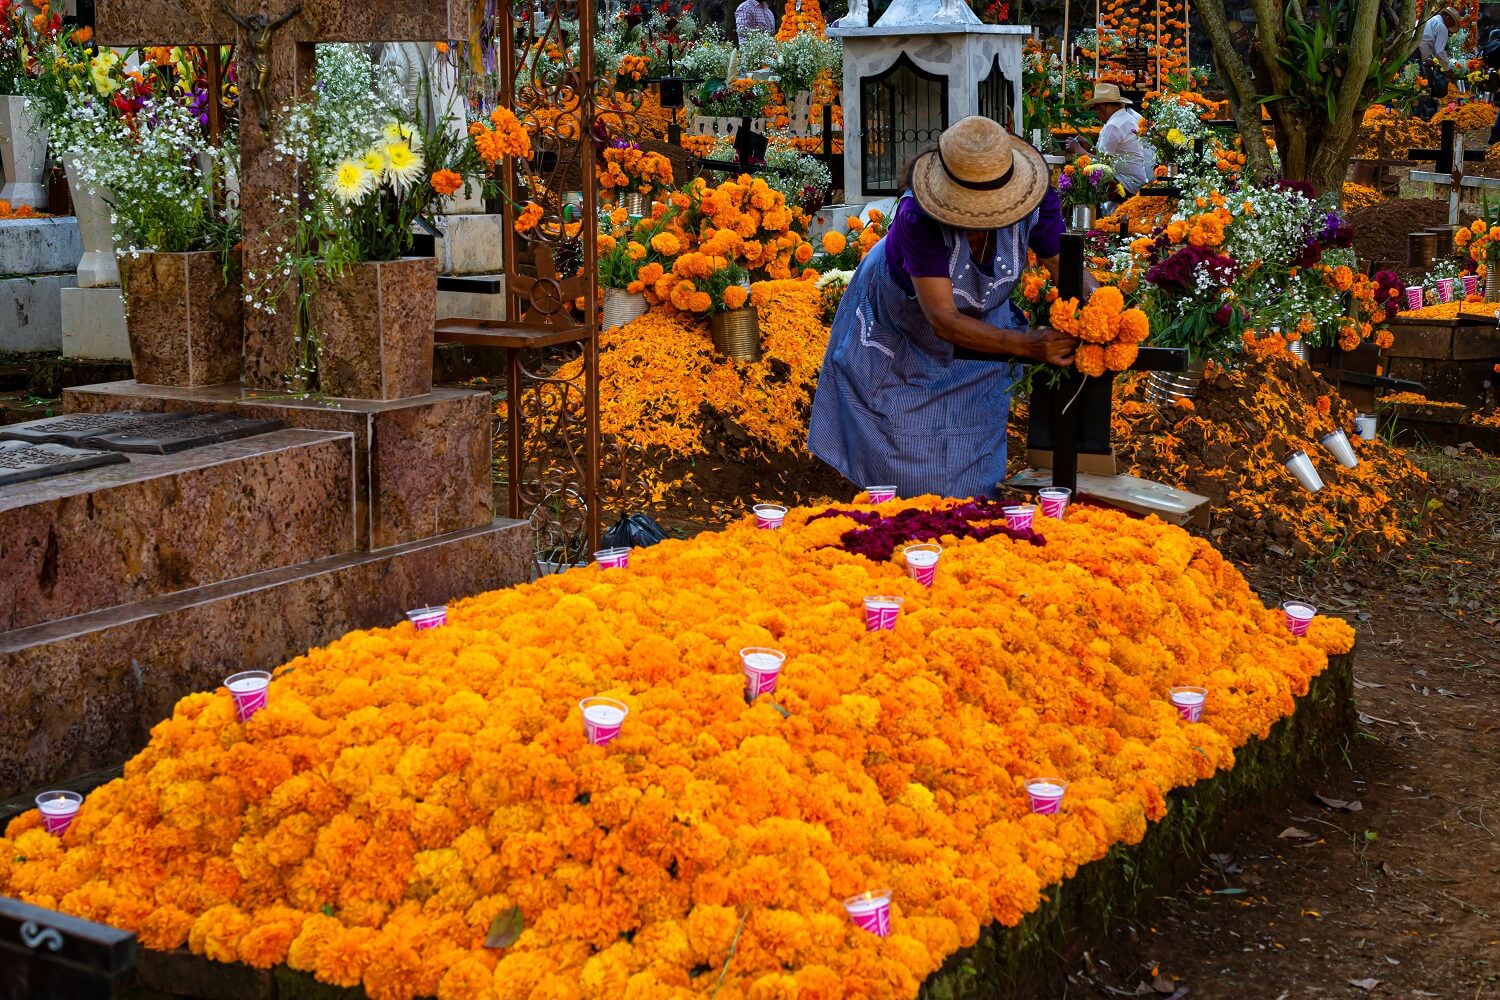 Lady decorating grave with marigolds (cempasúchil) flowers on the day of the dead in Michoacán, Mexico.